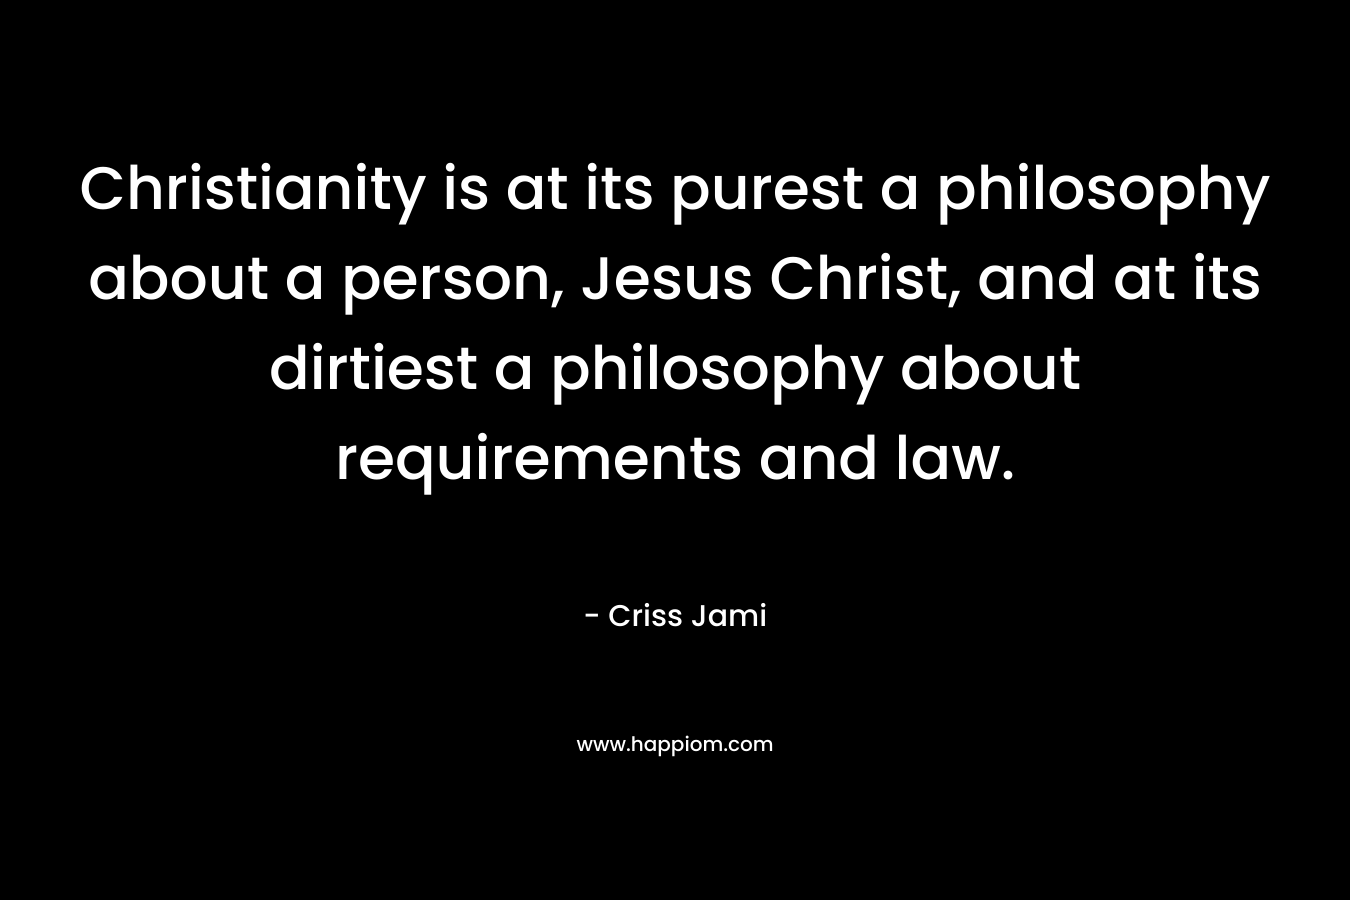 Christianity is at its purest a philosophy about a person, Jesus Christ, and at its dirtiest a philosophy about requirements and law.